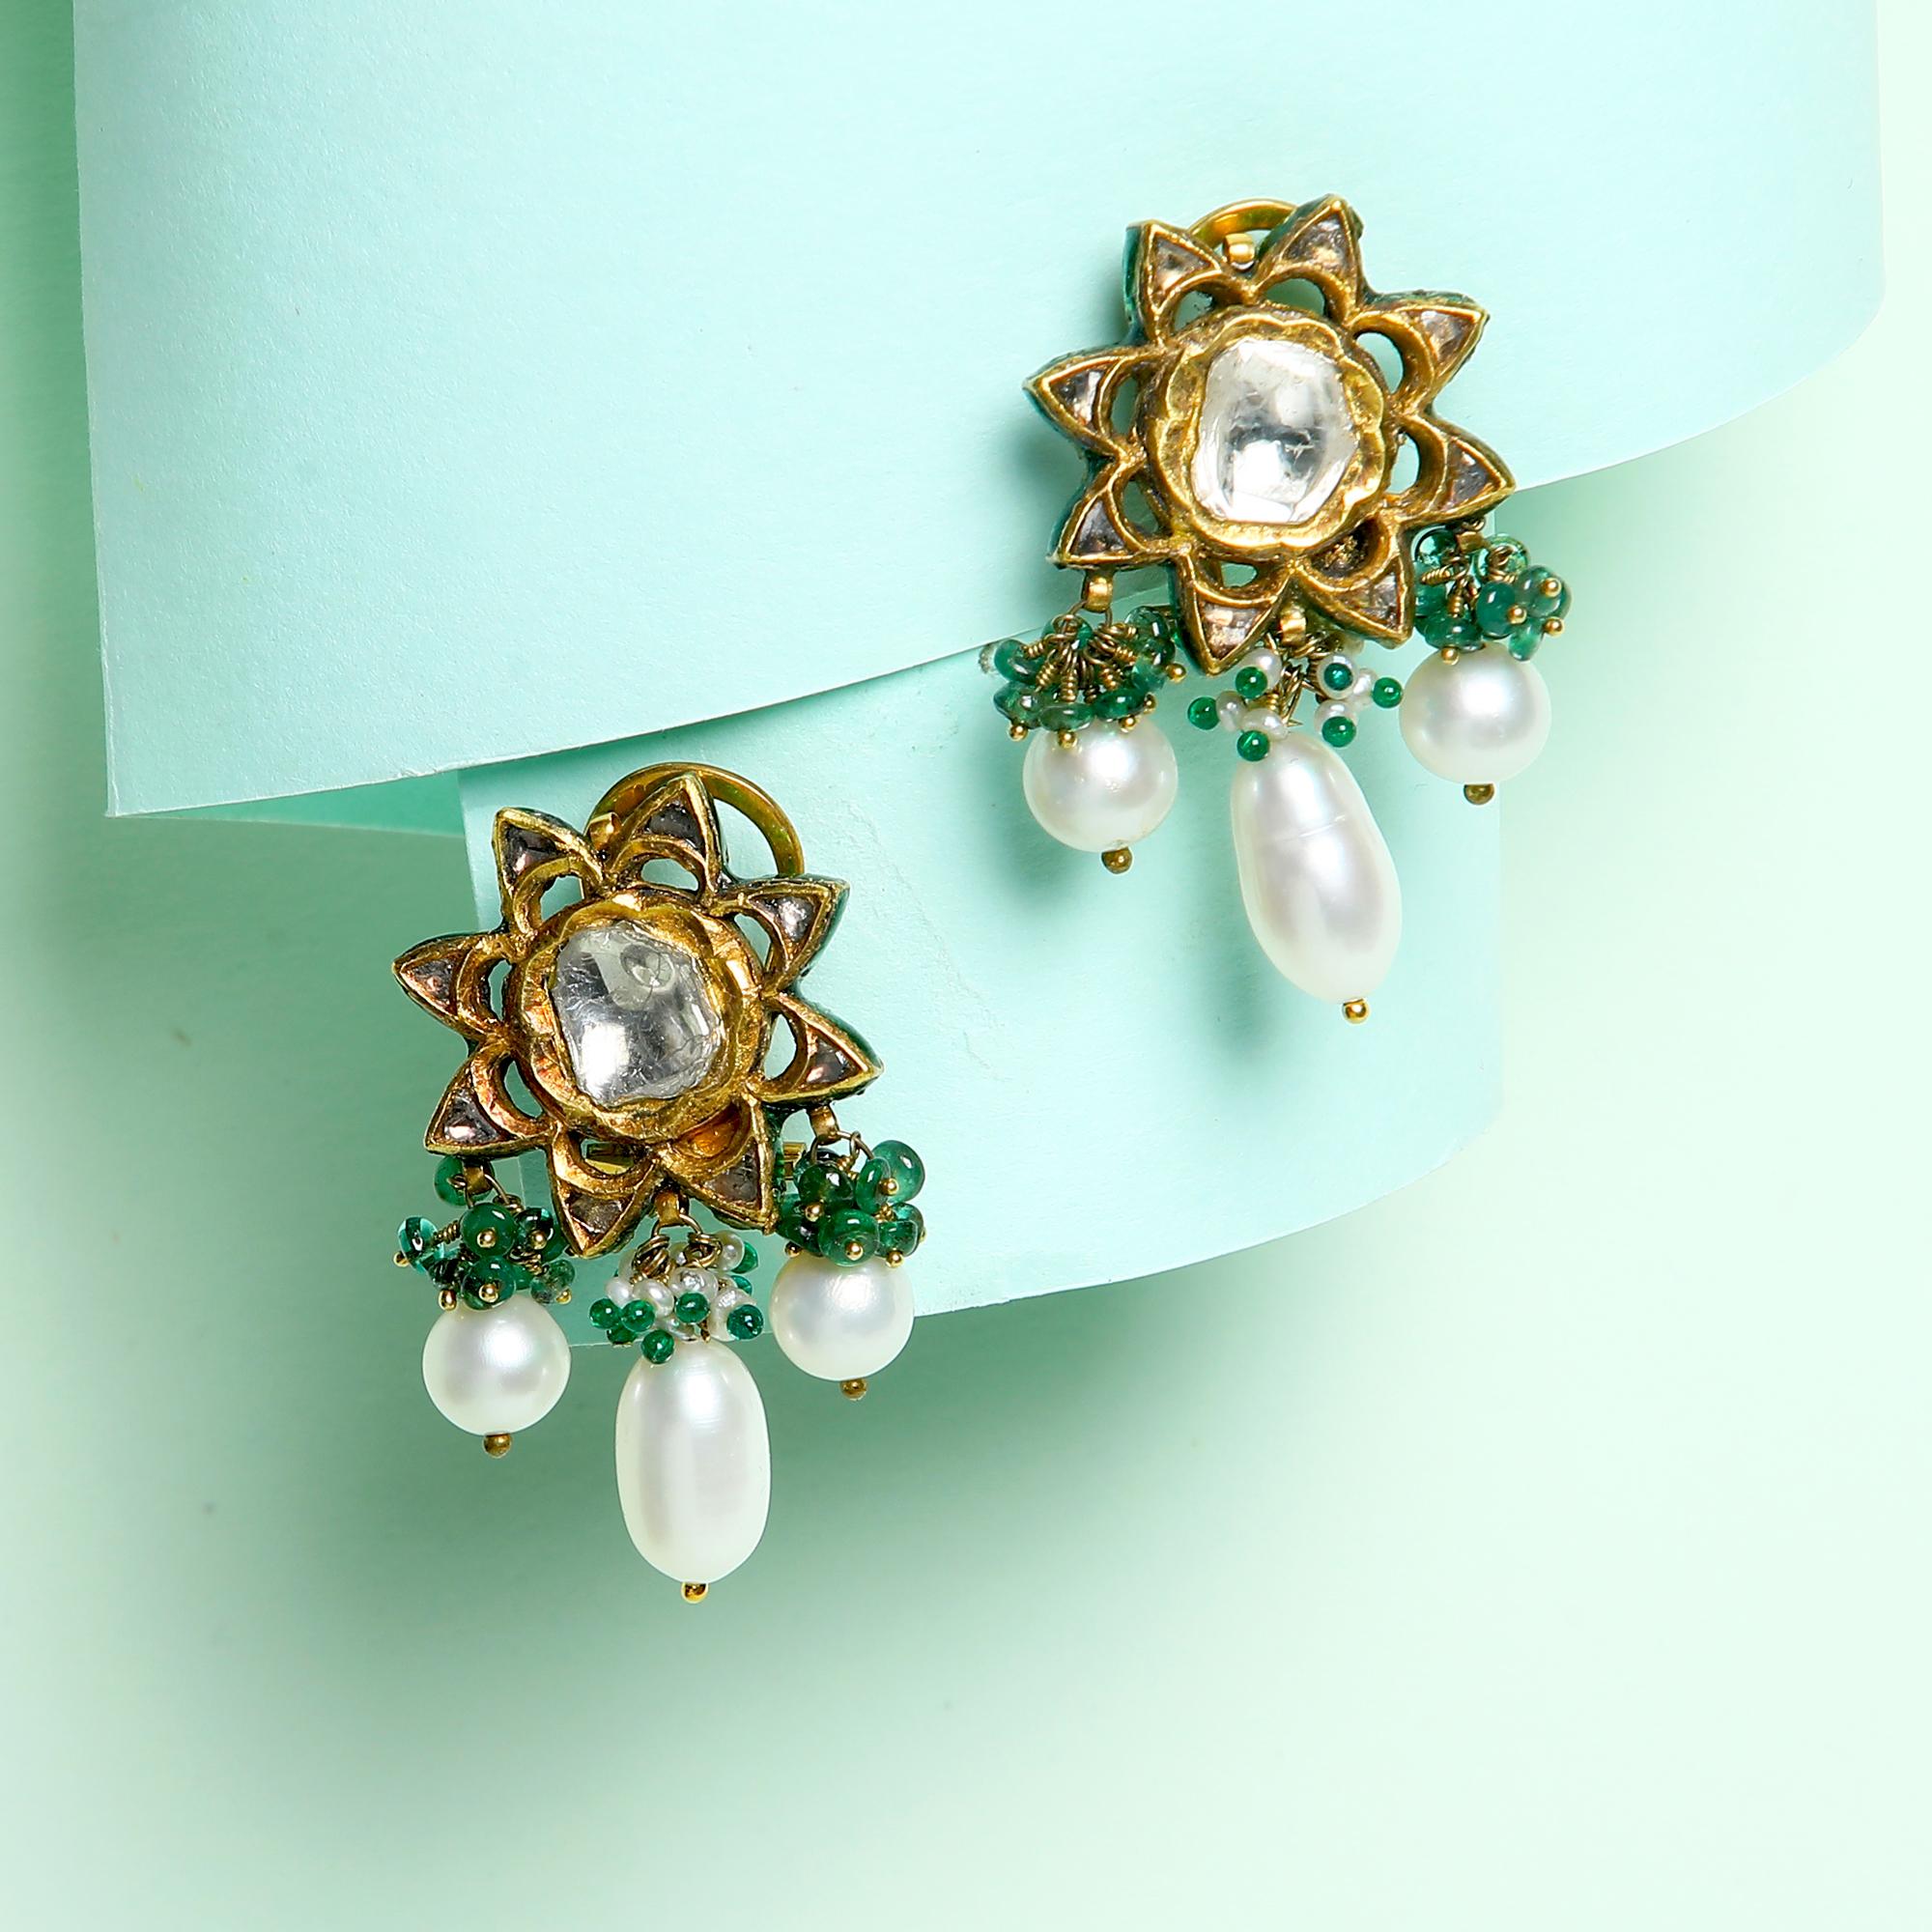 Polki Diamond, Emerald Beads and Droplet Pearls in a Stud Meets Jhumkas Style. 